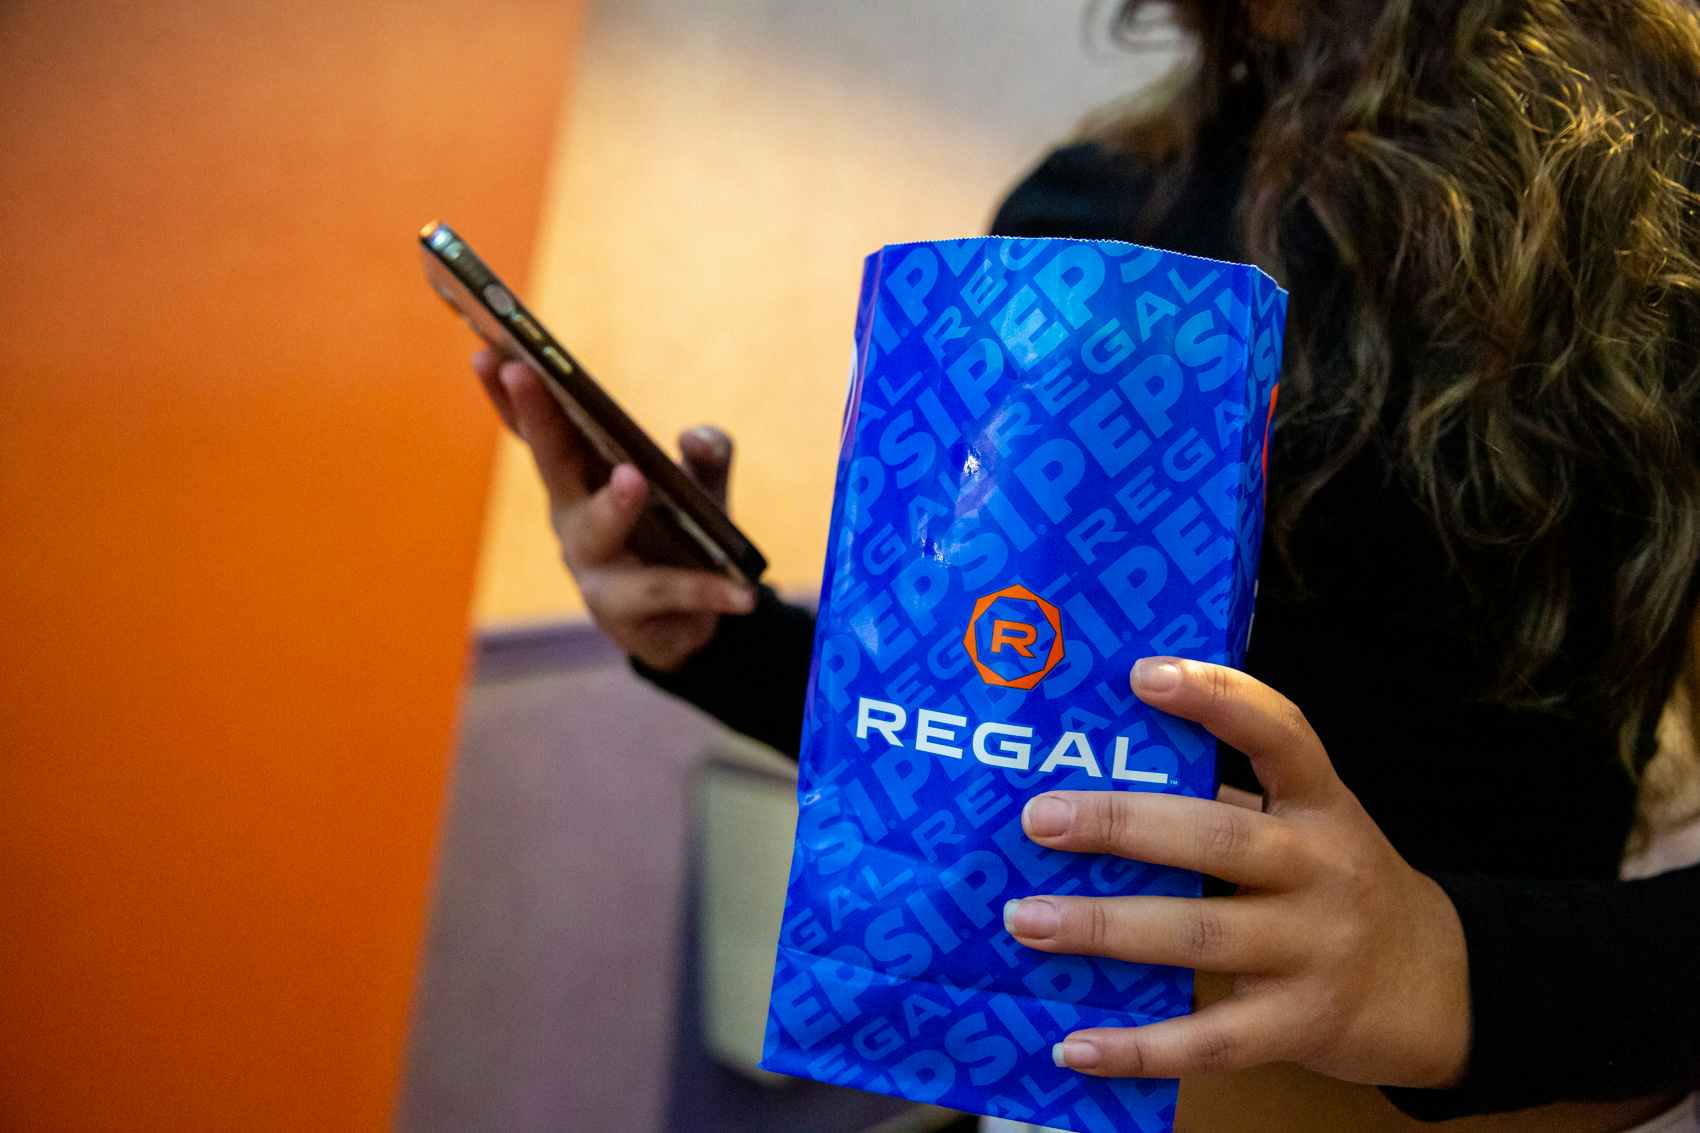 Woman holding a cellphone and a regal cinemas popcorn bag